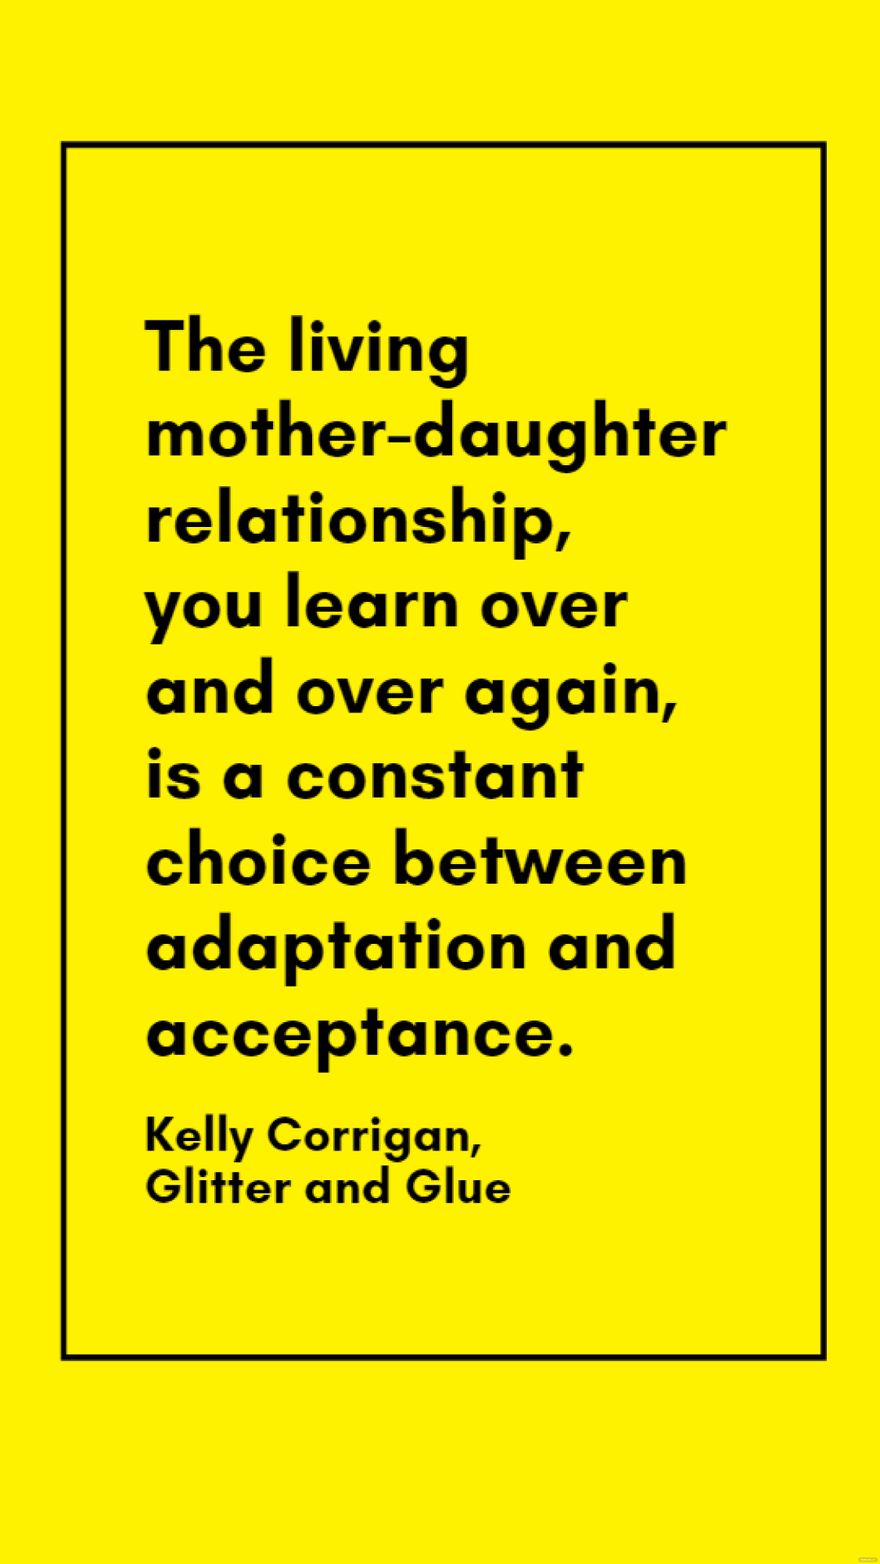 Kelly Corrigan, Glitter and Glue - The living mother-daughter relationship, you learn over and over again, is a constant choice between adaptation and acceptance.